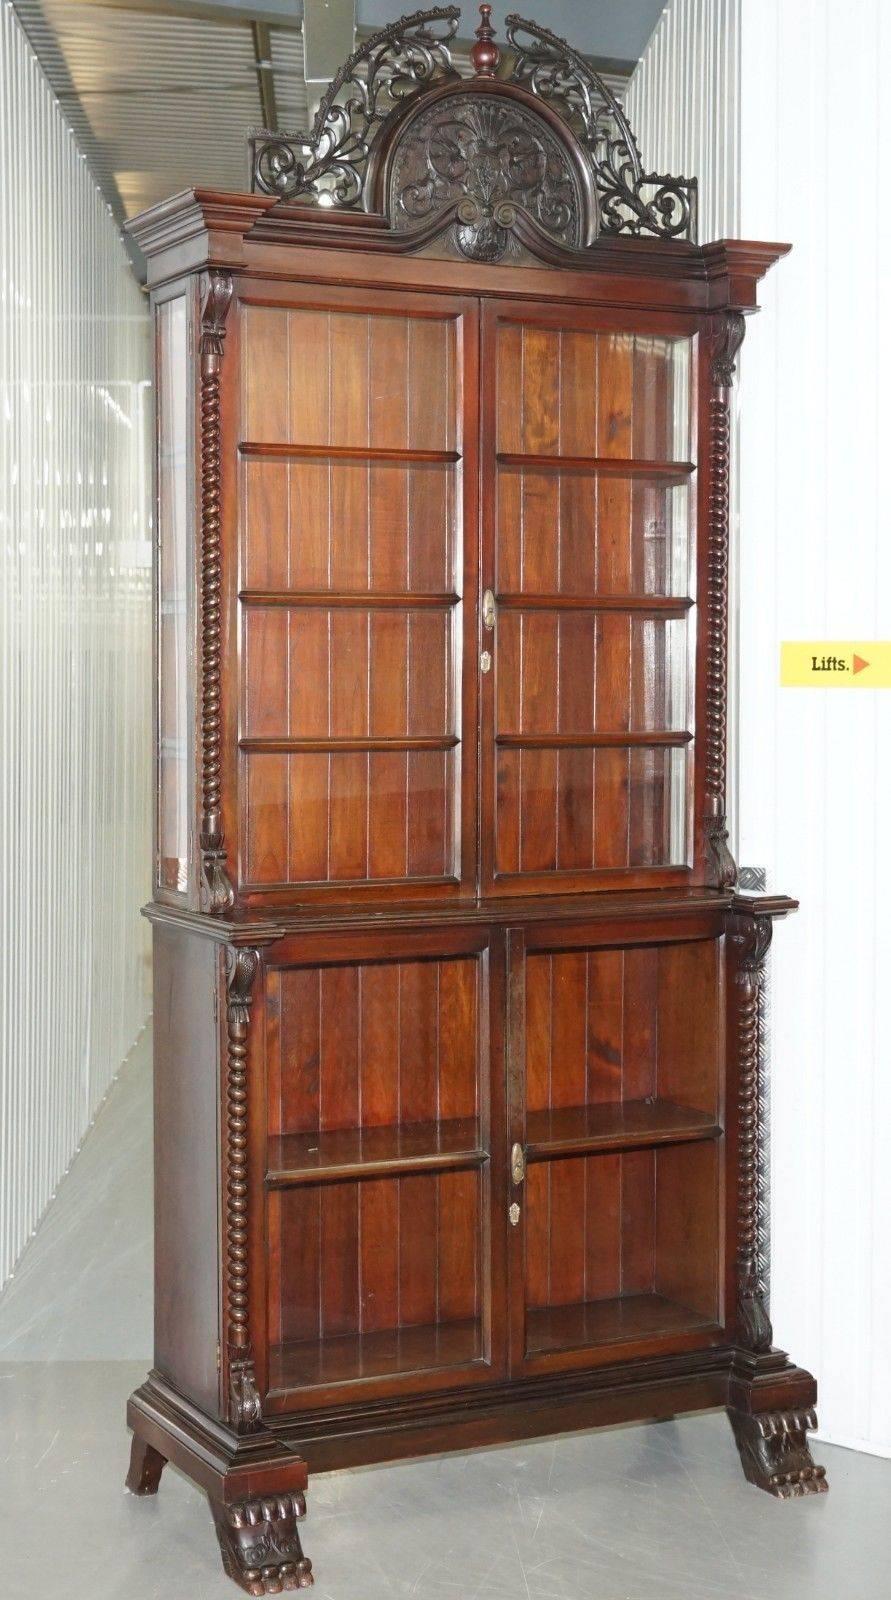 We are delighted to offer for sale this exceptionally large and grand Victorian hand-carved mahogany display bookcase

This bookcase is one of the most spectacular pieces of furniture I have ever seen, the carving to the top is simply exquisite,